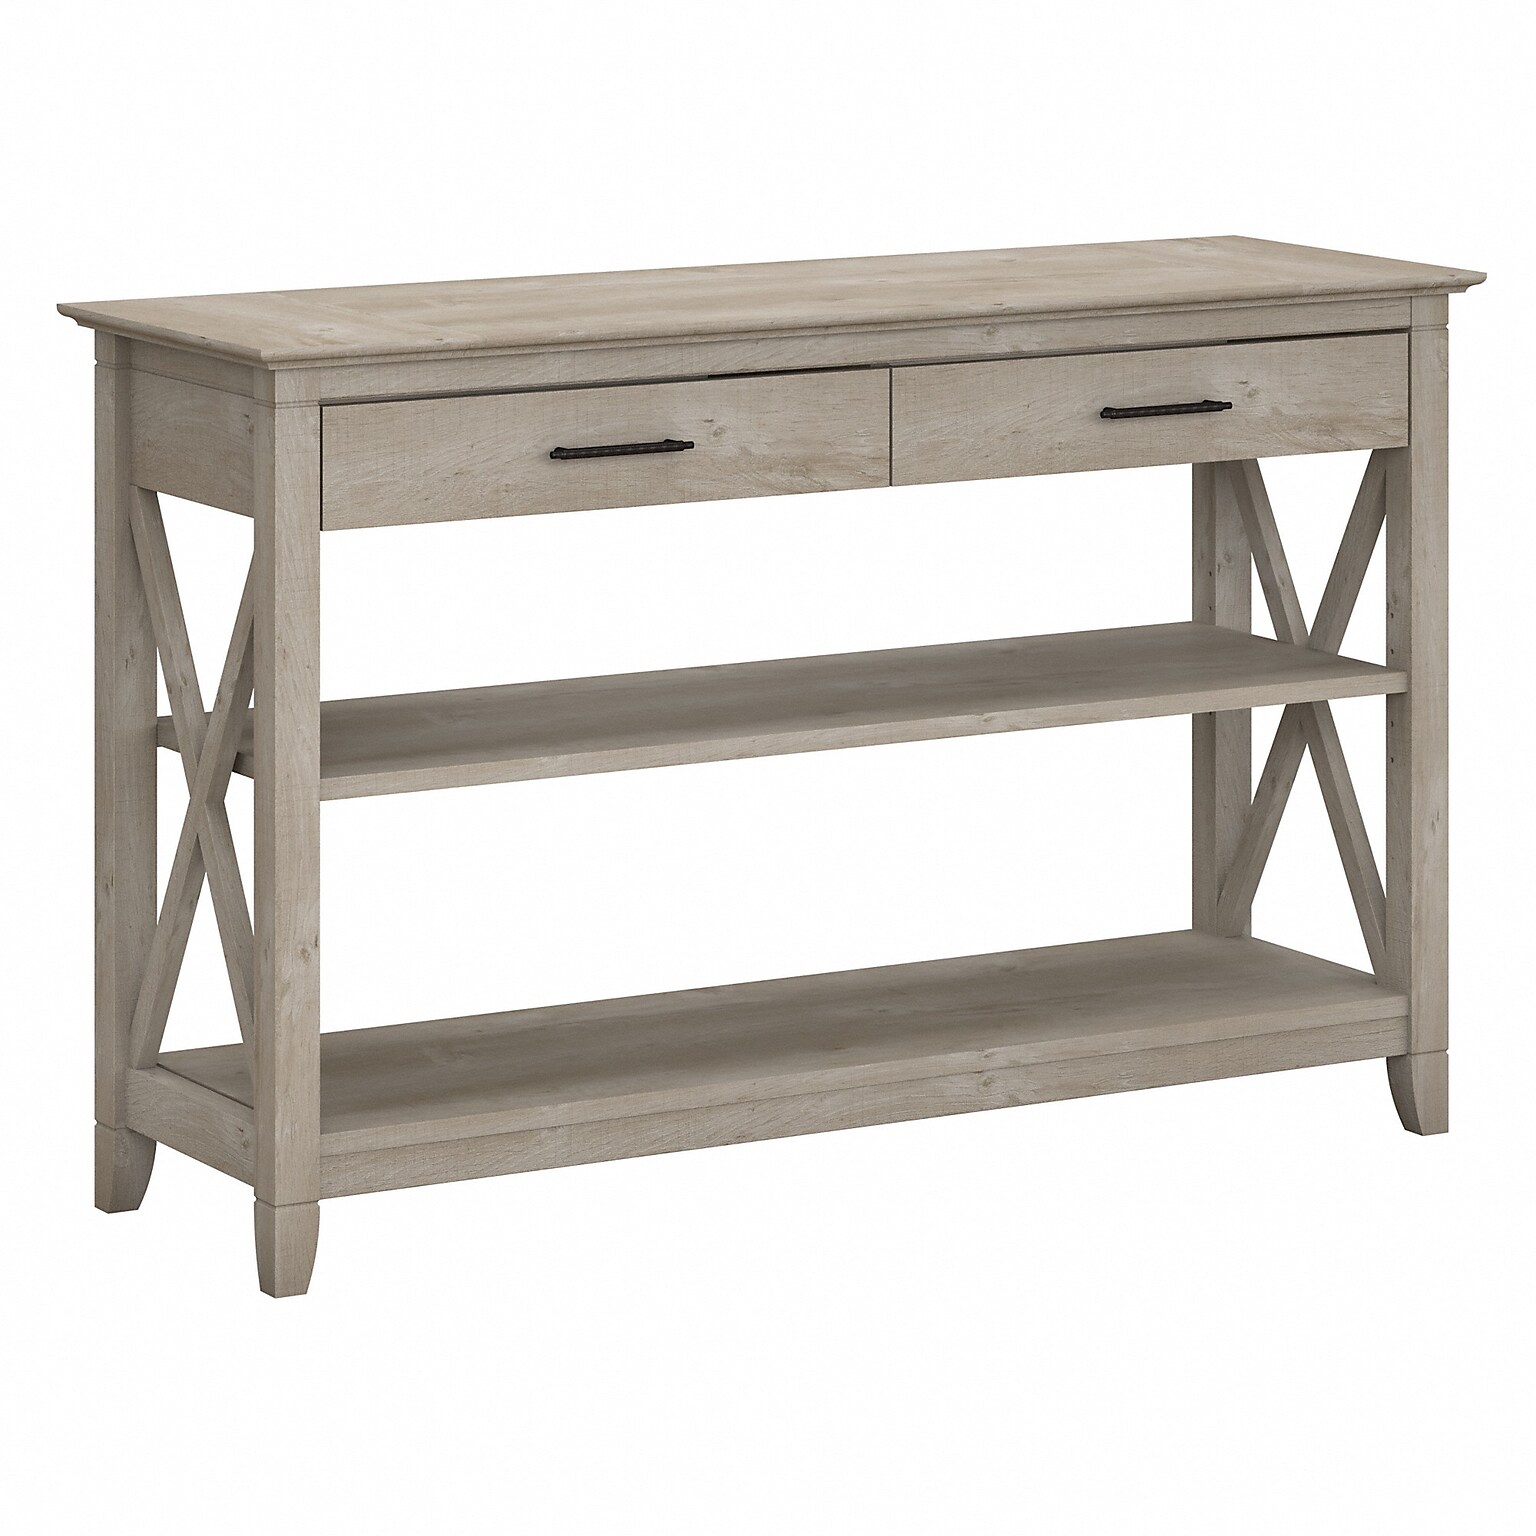 Bush Furniture Key West 47W x 16D Console Table with Drawers and Shelves, Washed Gray (KWT248WG-03)